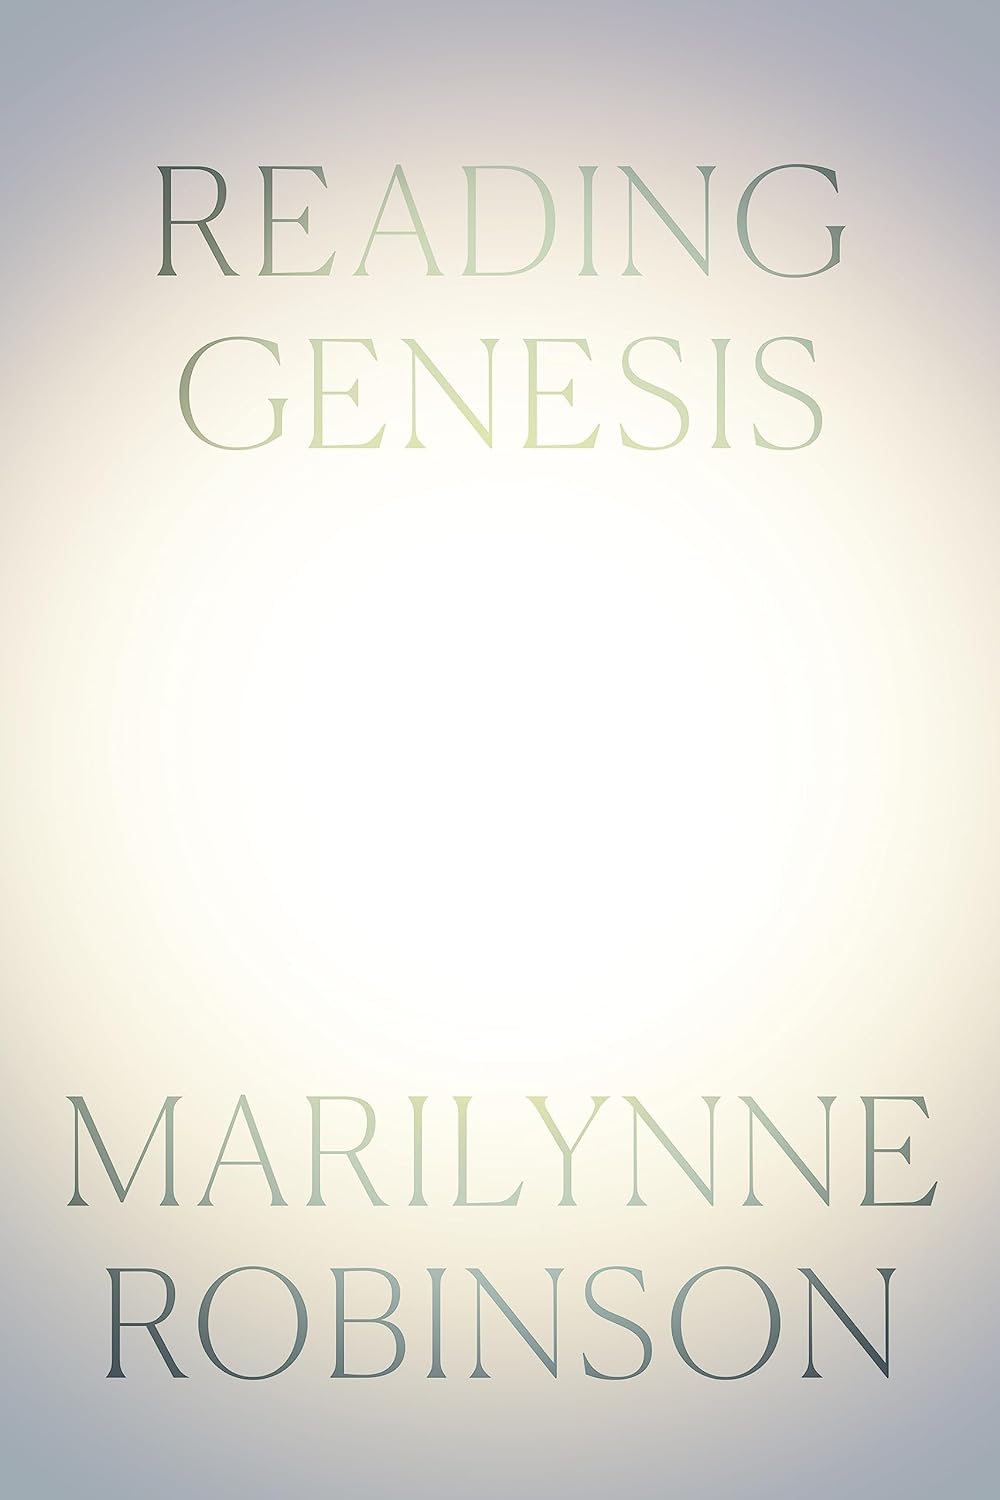 The cover of Reading Genesis